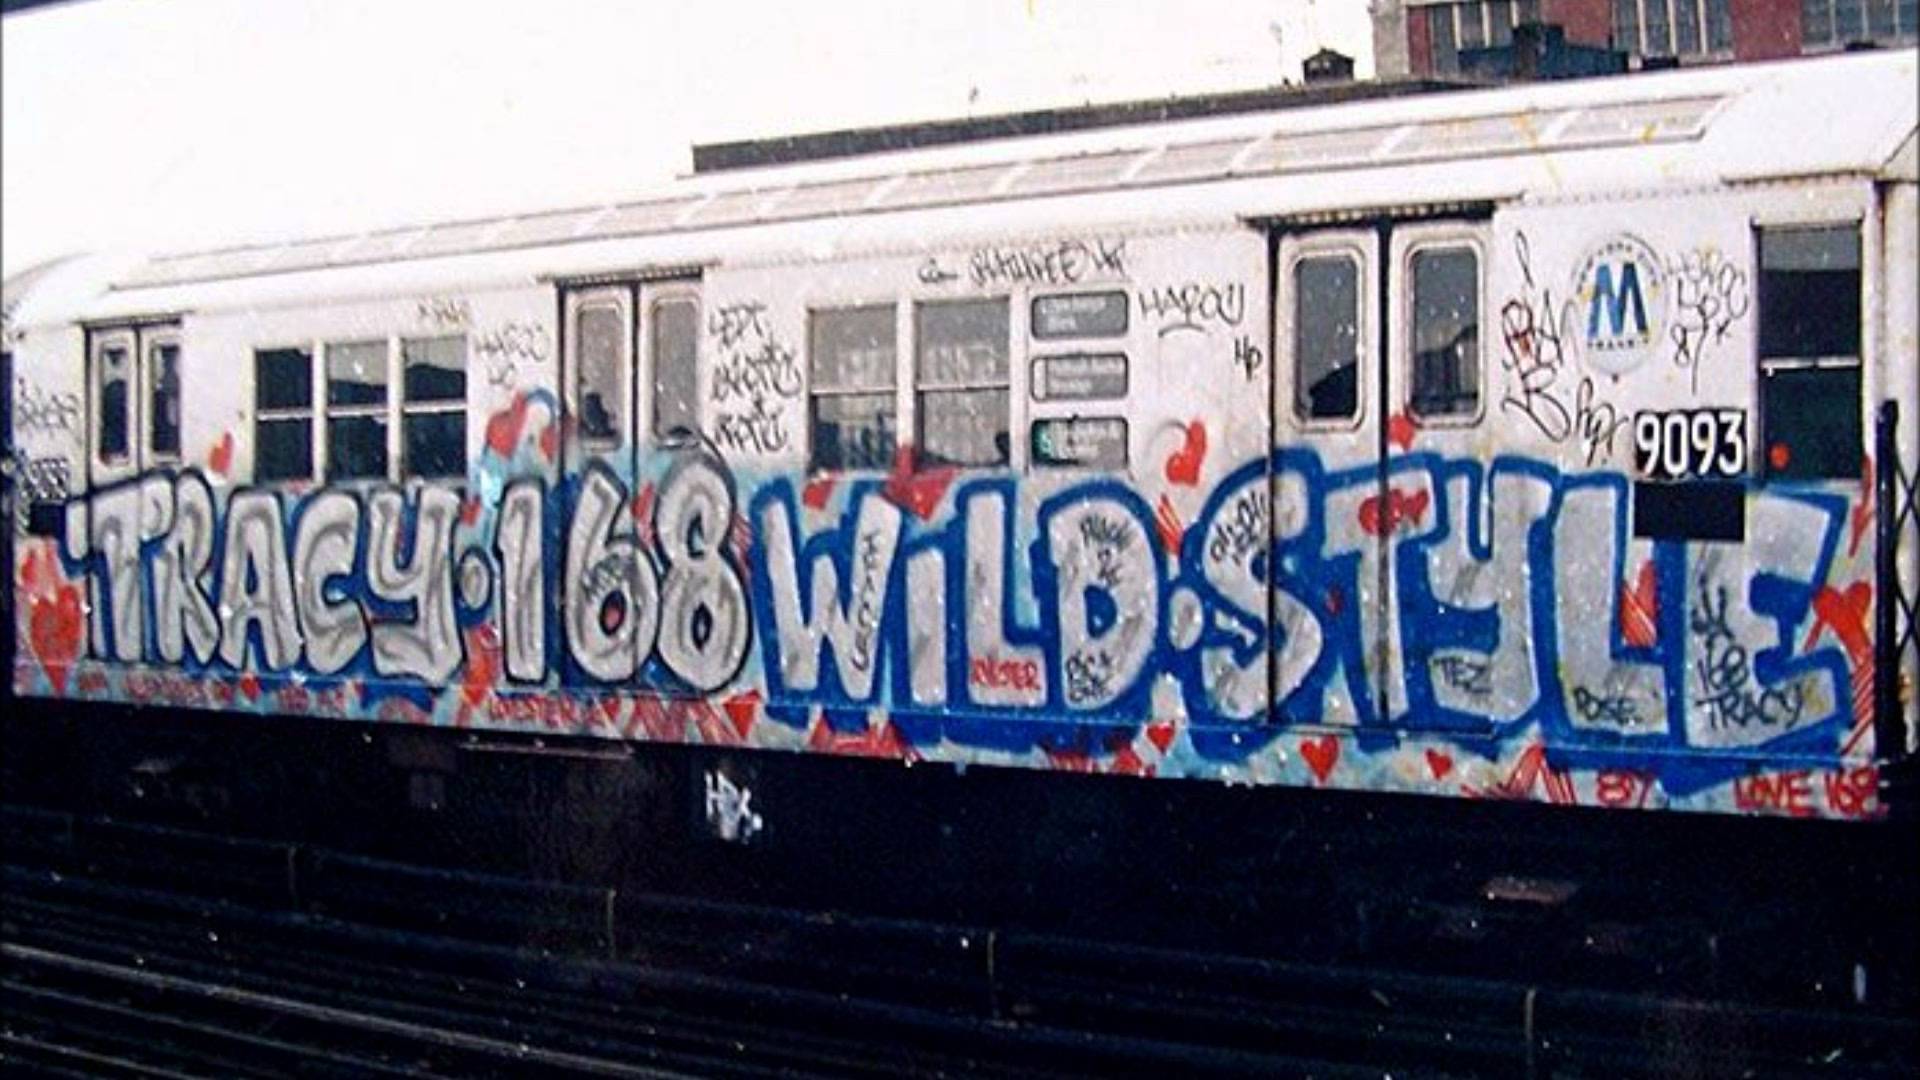 A History of Graffiti - The 60's and 70's